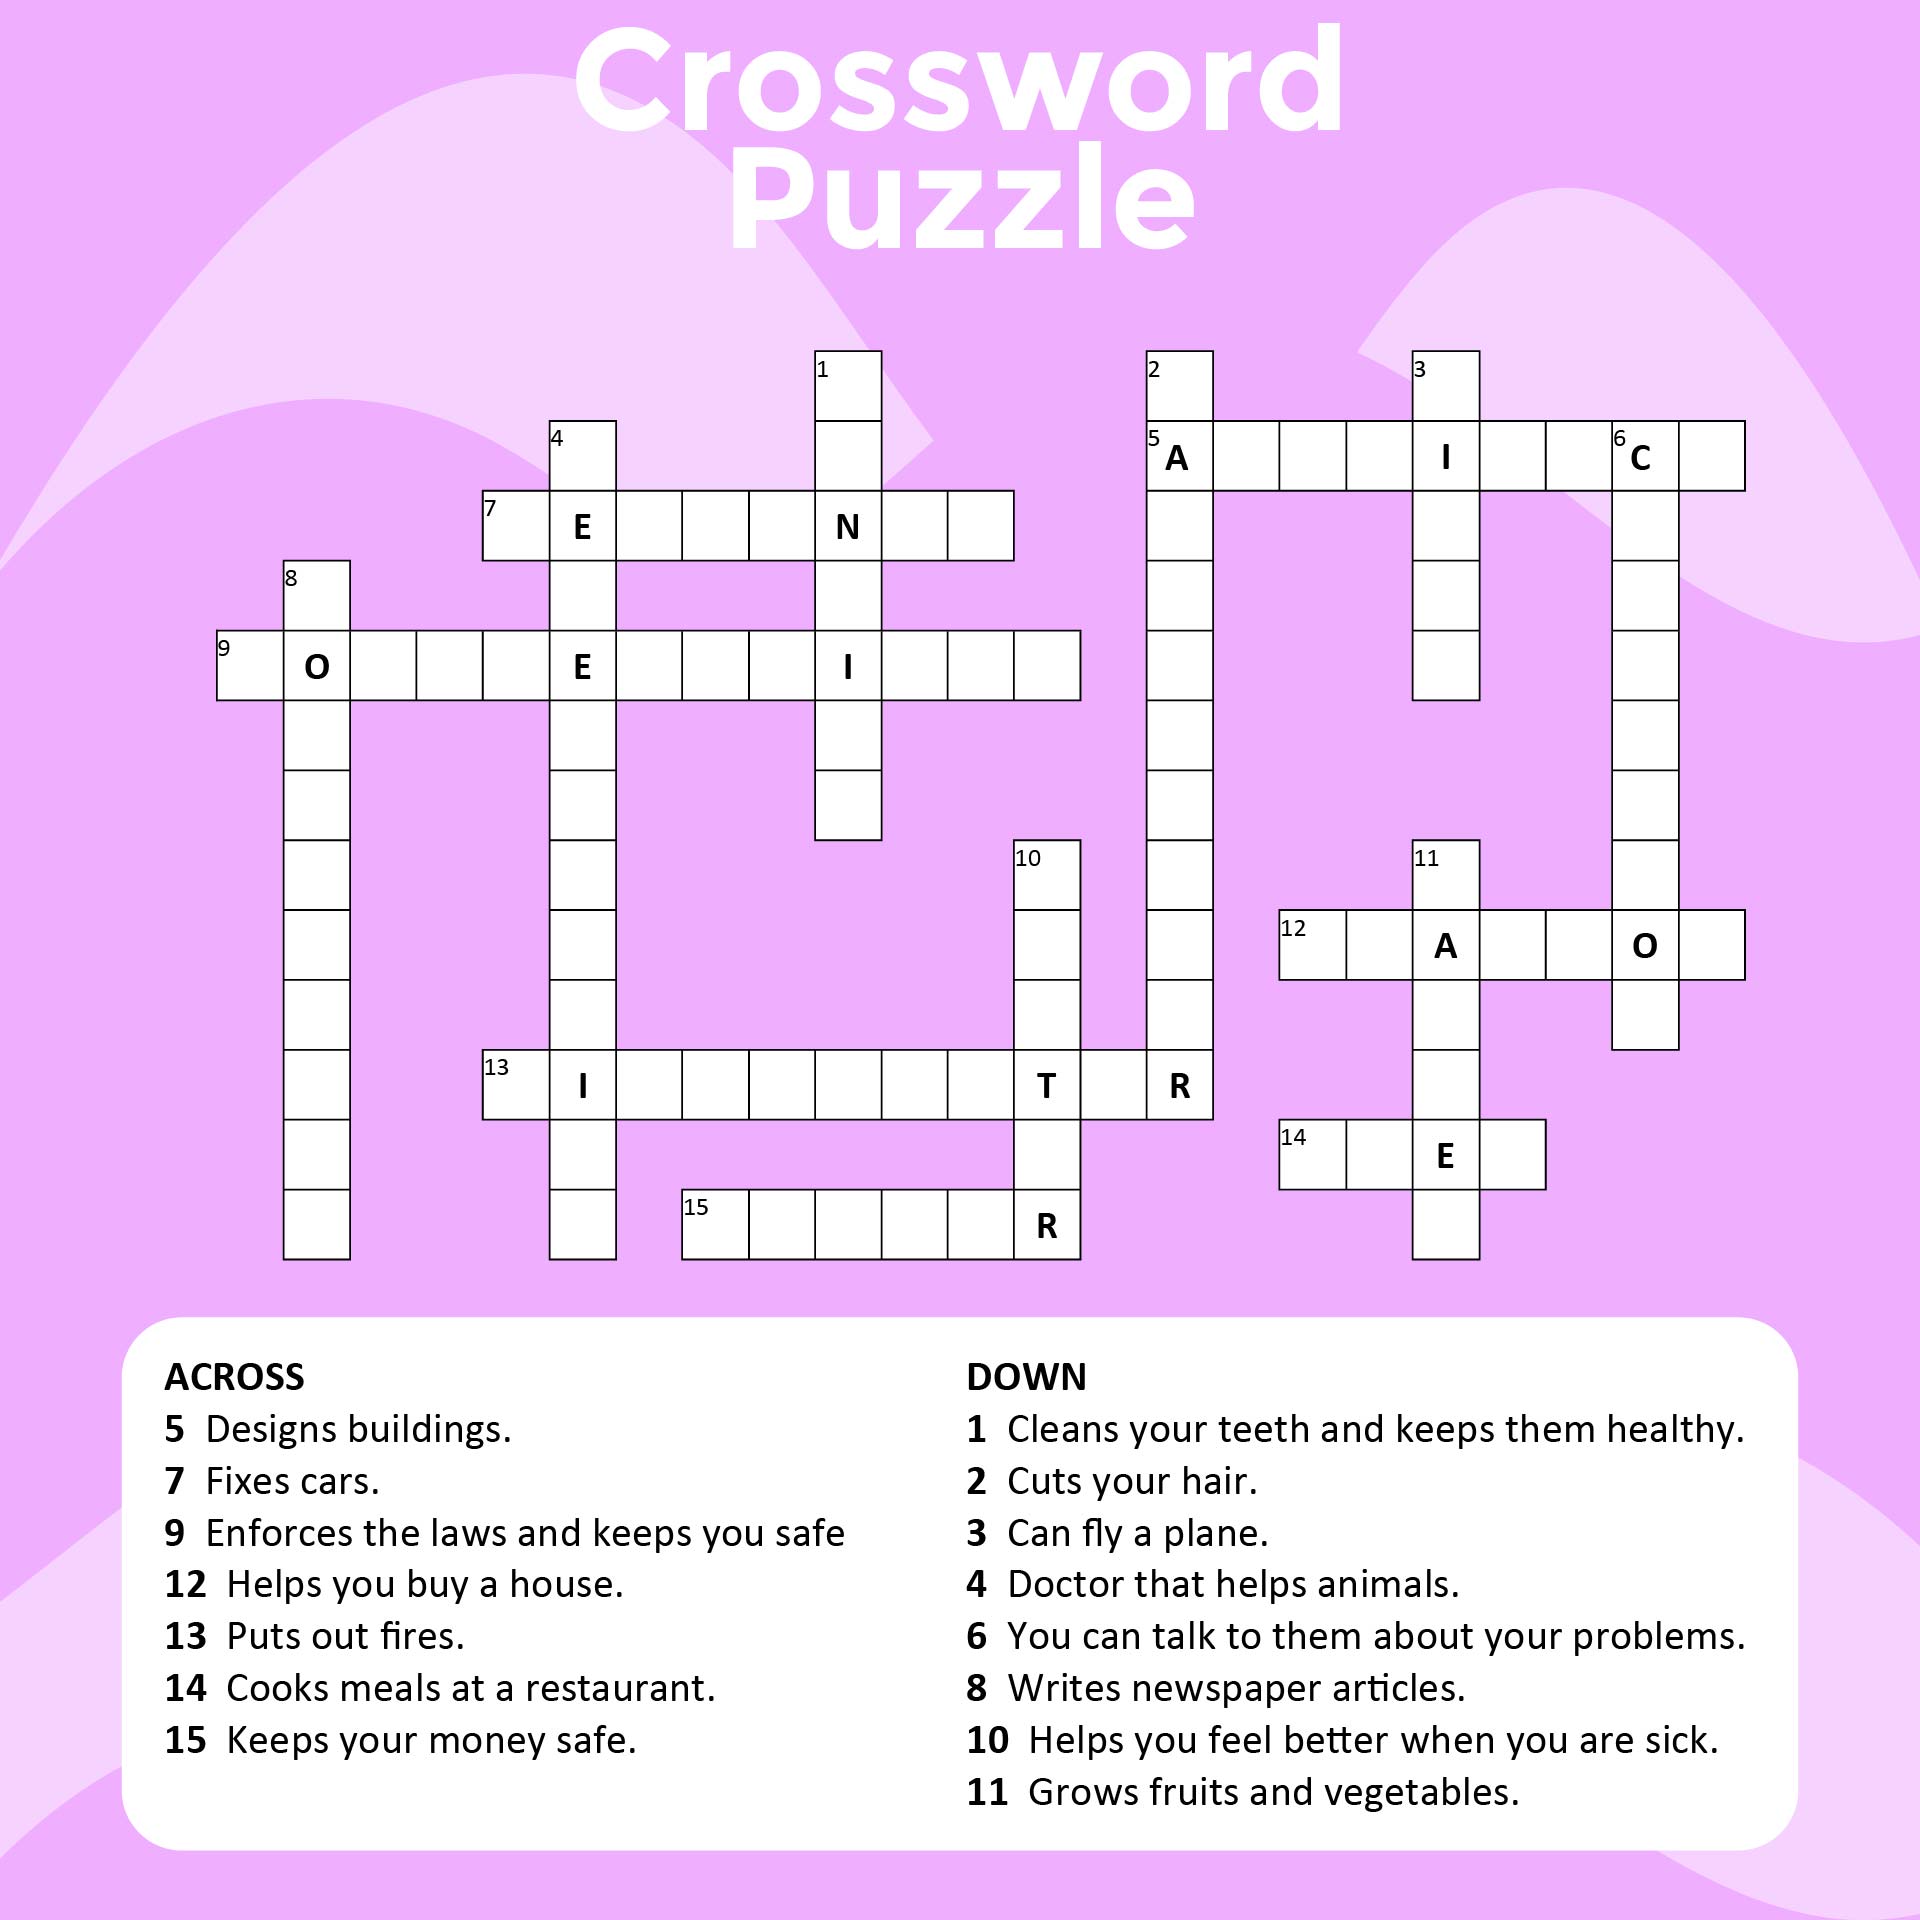 What do you call a person who solves crossword puzzles? 